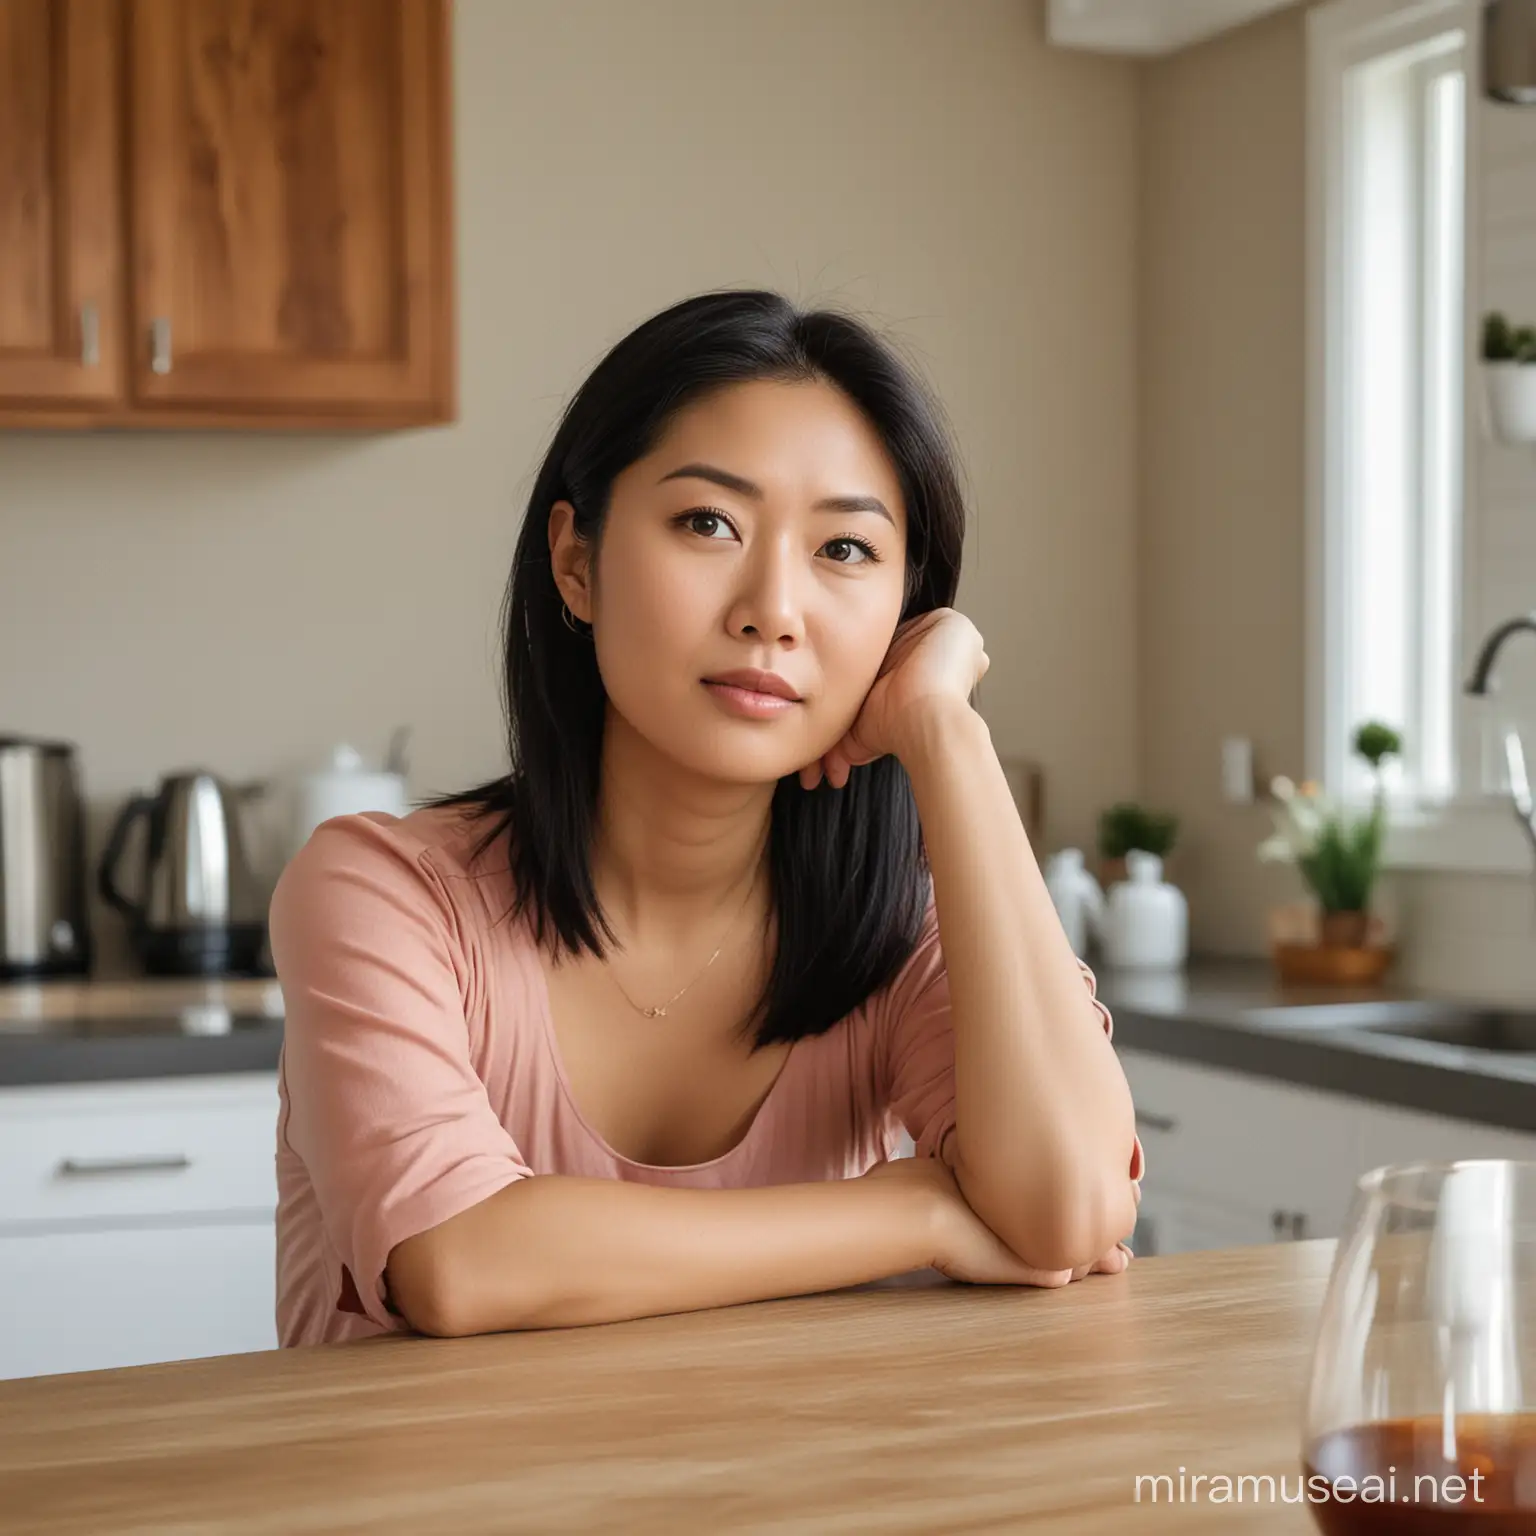 The same attractive asian woman is sitting at her kitchen table in contemplation and realizes that she needs to make a big change in her life. She is ready to act.
